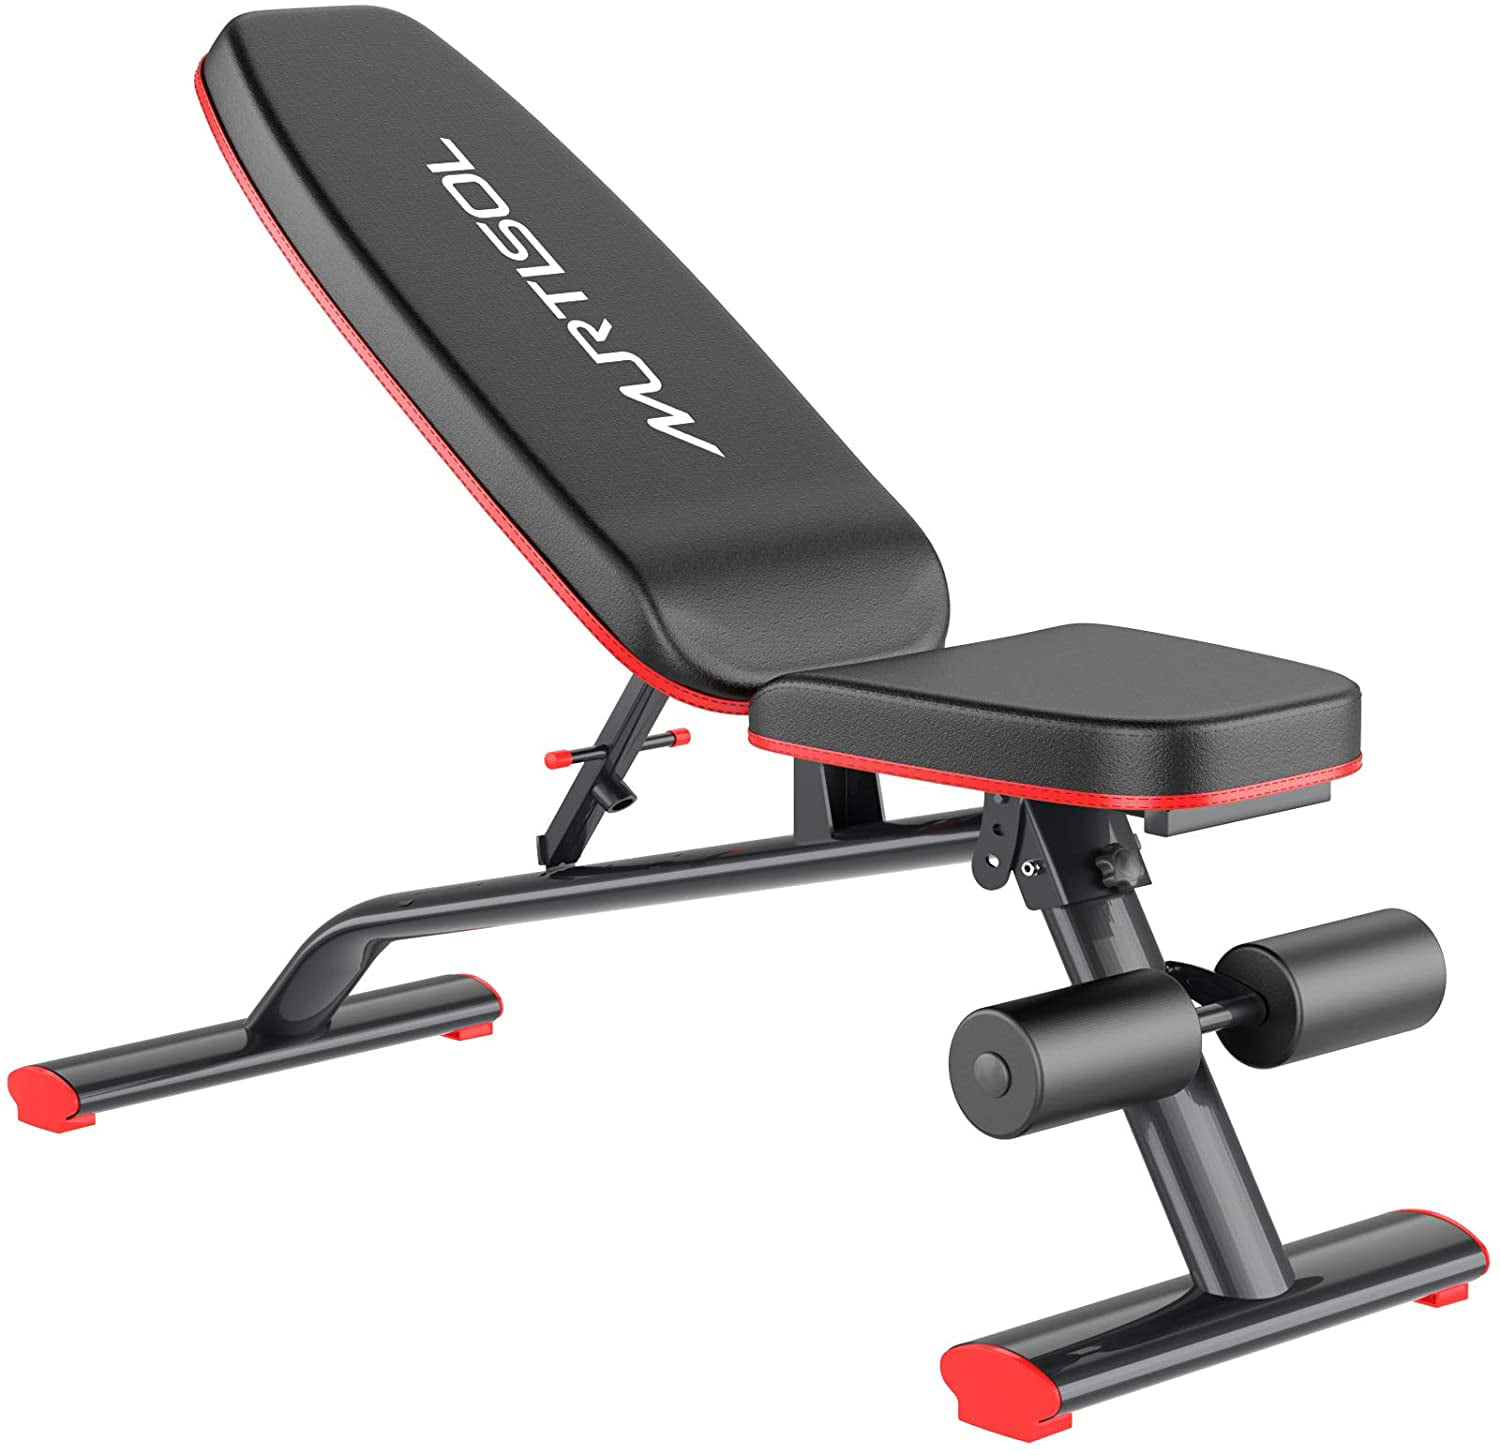 Foldable Adjustable Weight Bench Incline Decline Full Body Workout Gym Exercise 